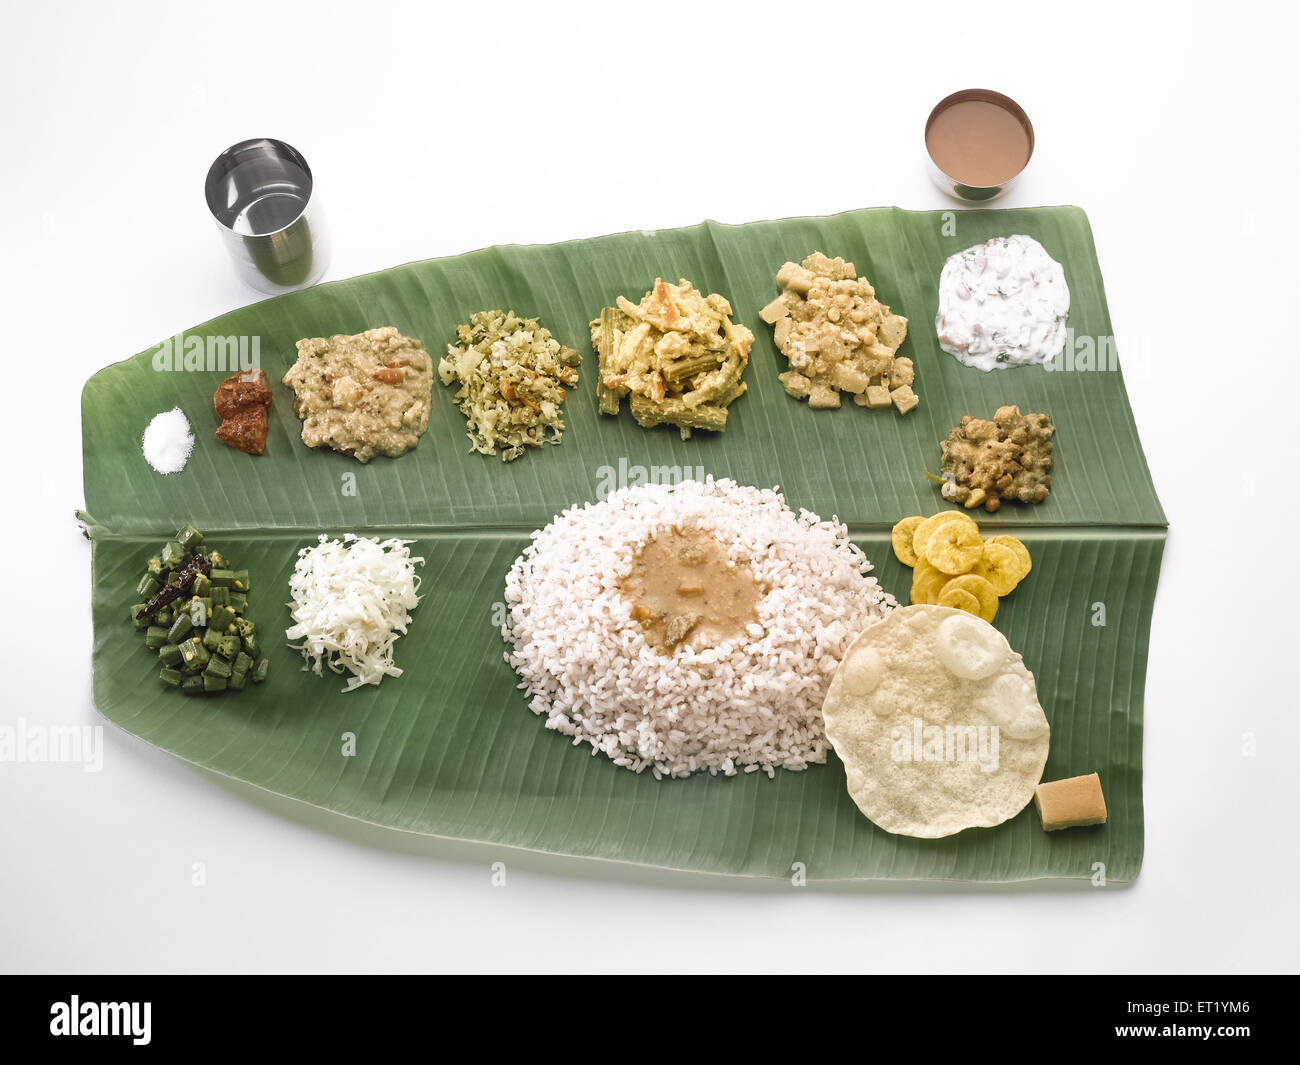 South Indian lunch served on green banana leaf Stock Photo